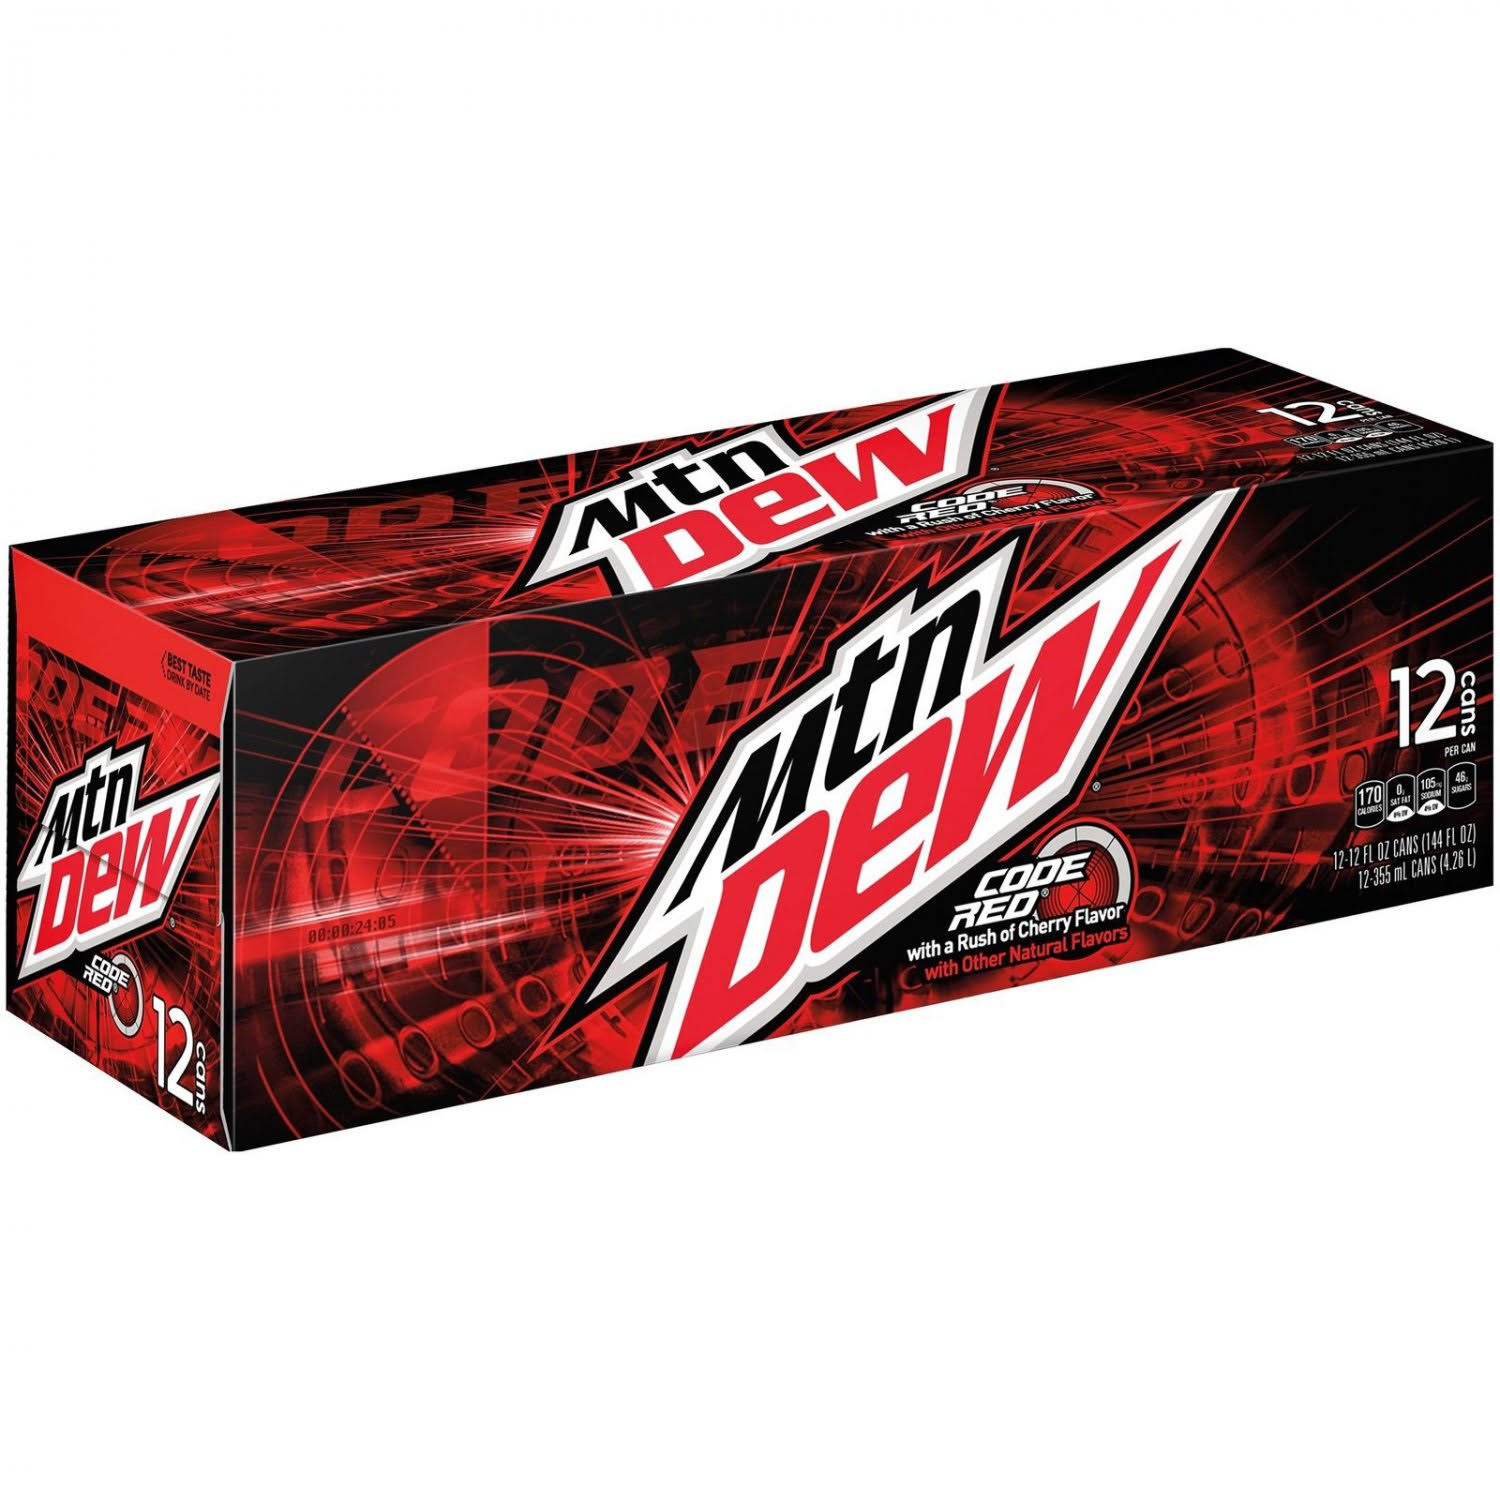 Mountain Dew Code Red Soda - 12oz, 12 Cans